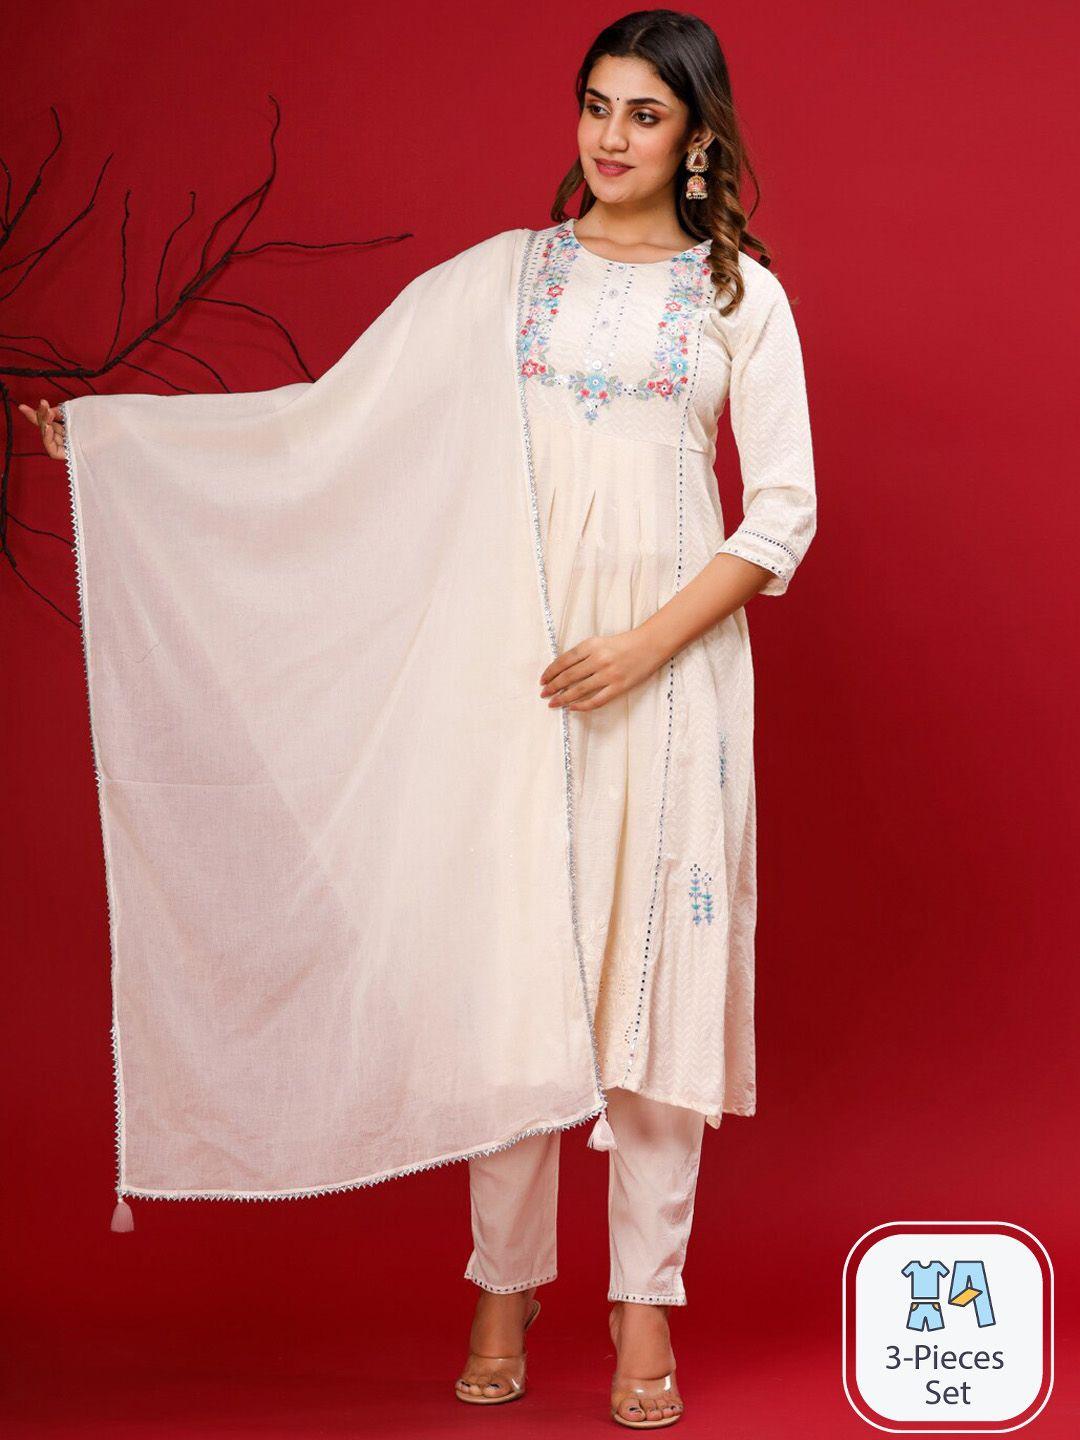 readiprint fashions floral embroidered pure cotton anarkali kurta trousers with dupatta